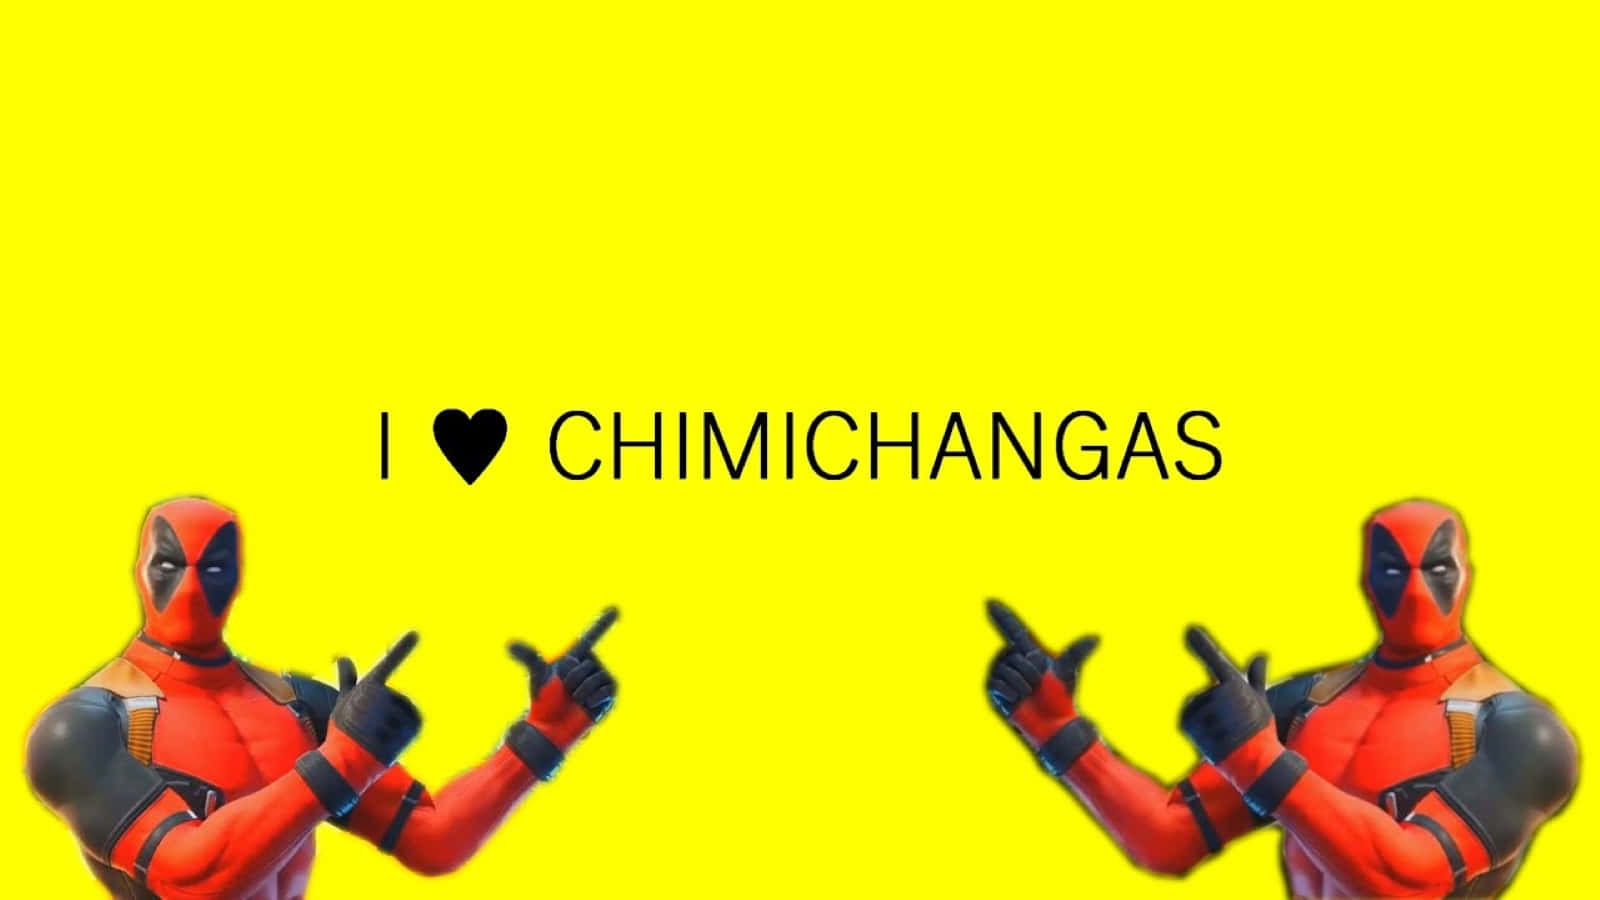 Delicious and Crispy Chimichangas Wallpaper